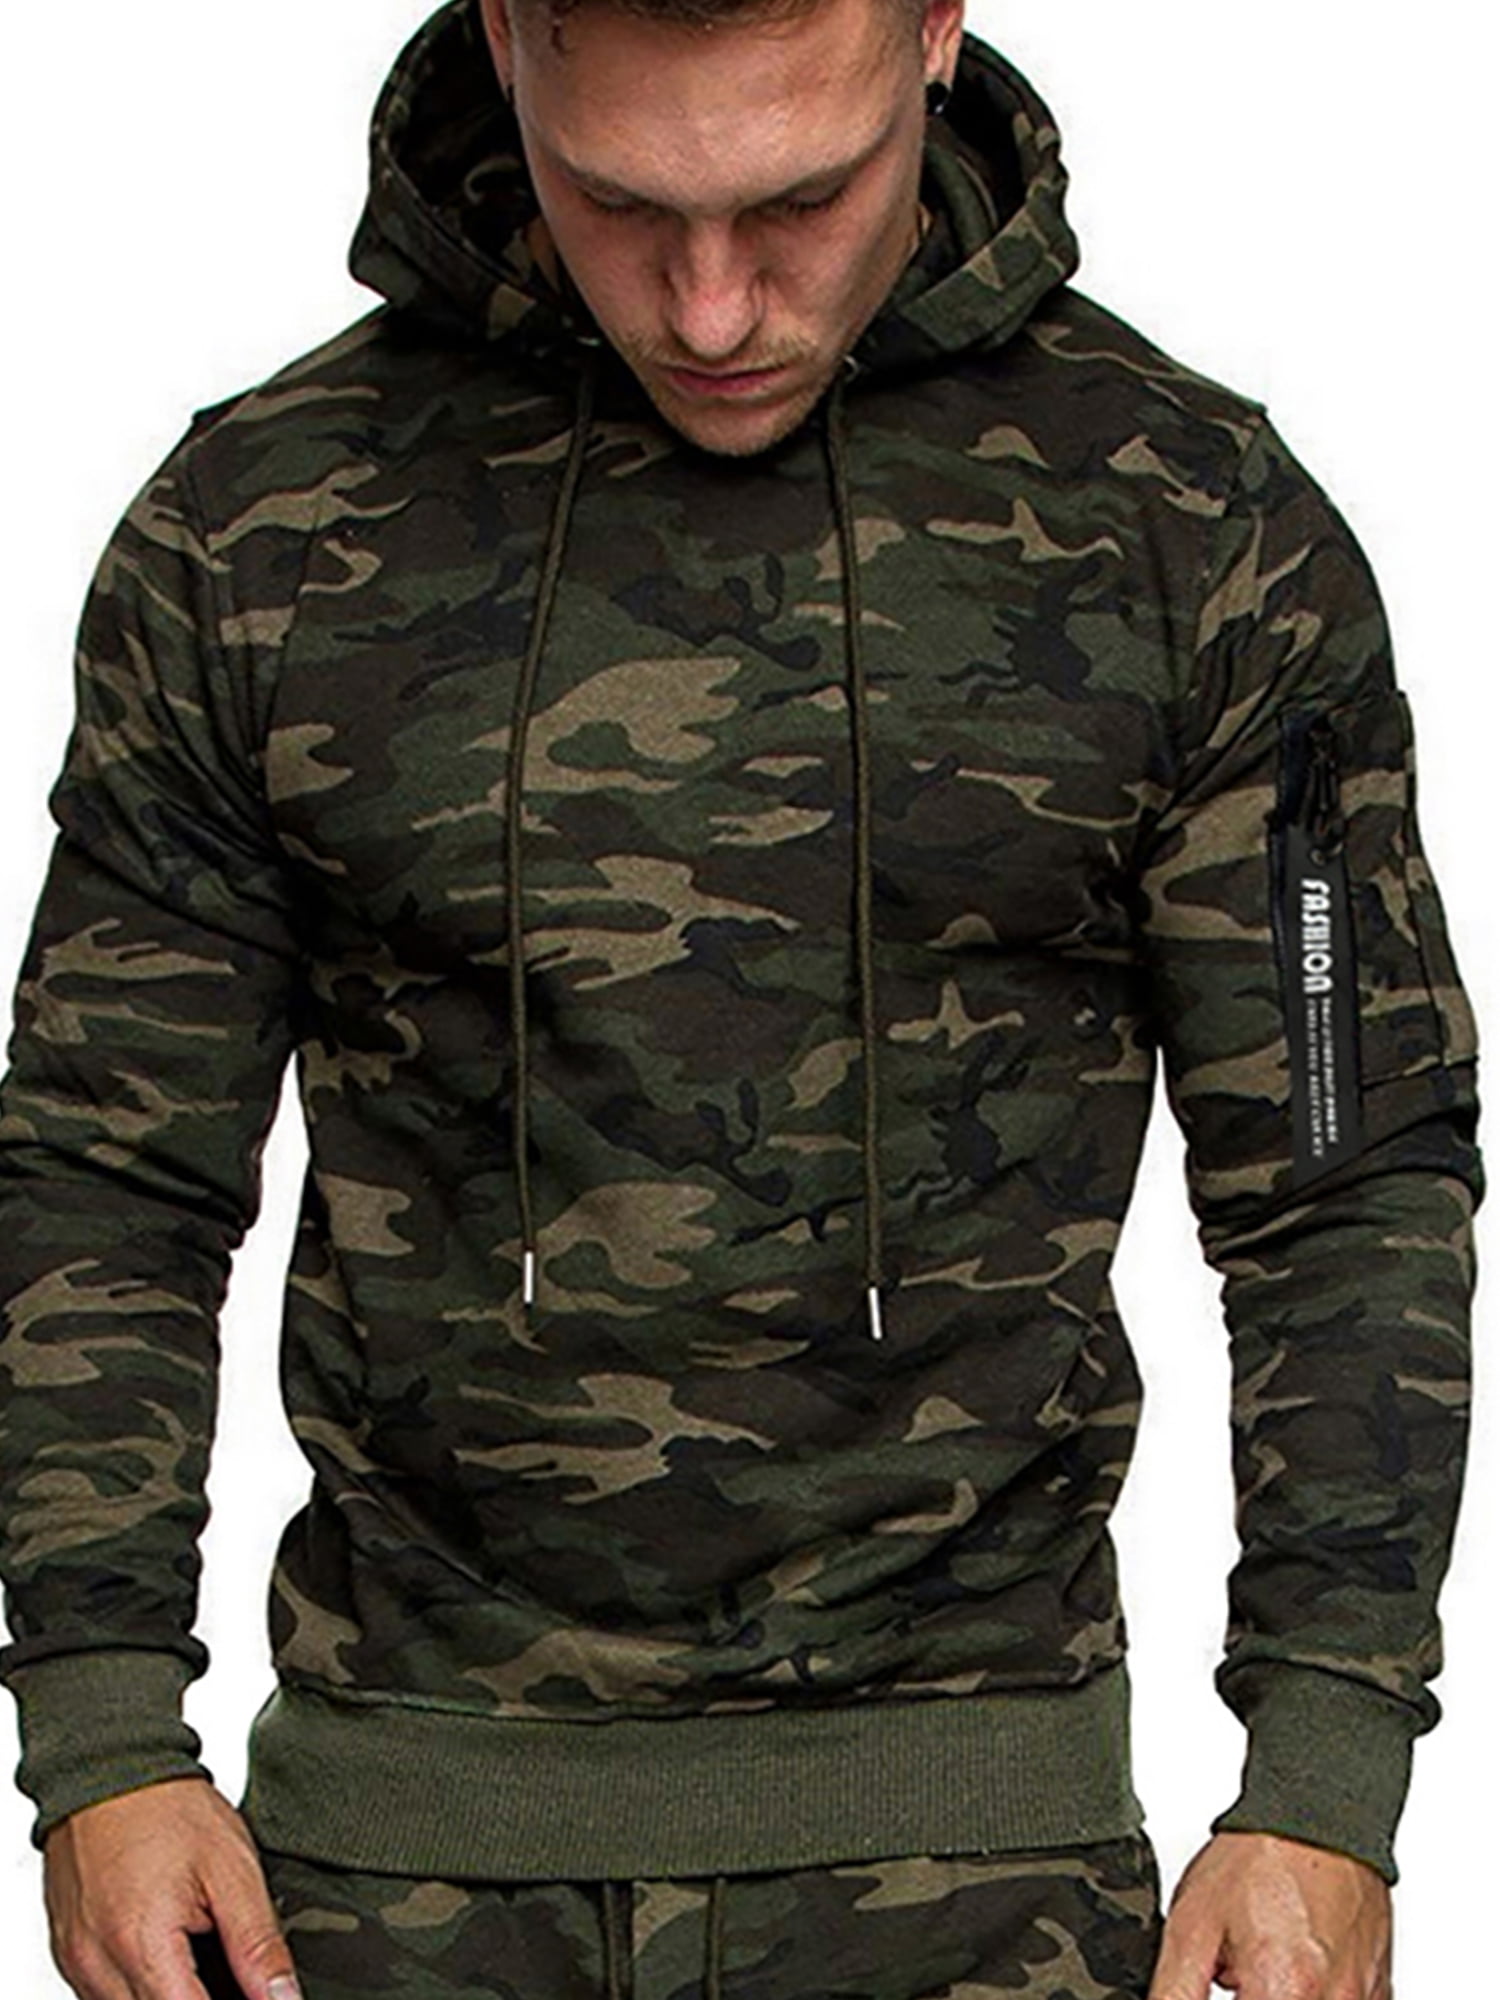 Mens Hoodies Zipper Slim Casual Long Sleeve Camo Patchwork Hooded Pullover Camo Hooded Sweatshirts in Sizes M-3XL